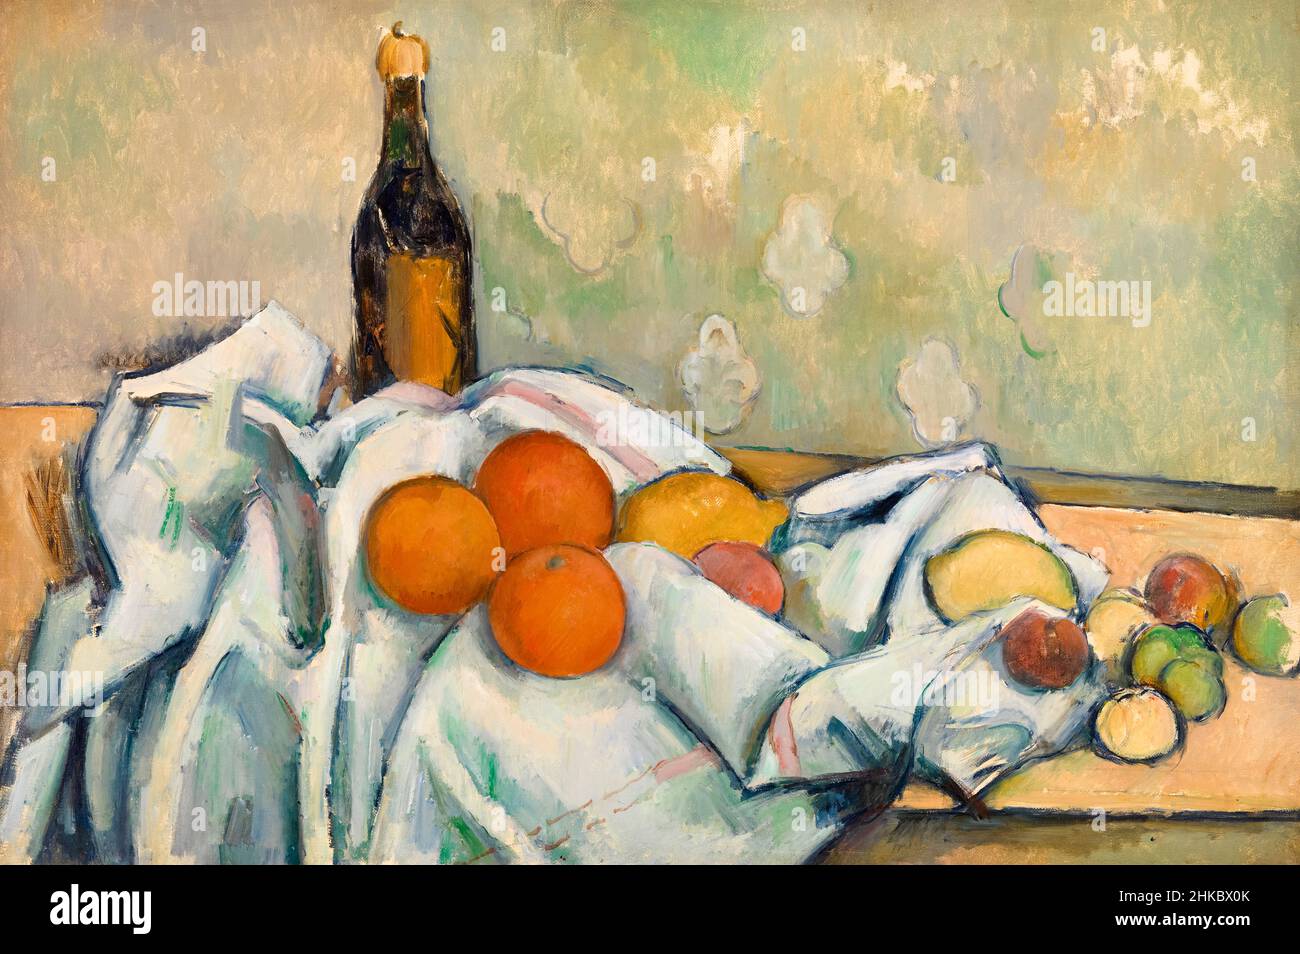 Bottle and Fruits, still life painting by Paul Cezanne, circa 1890 Stock Photo